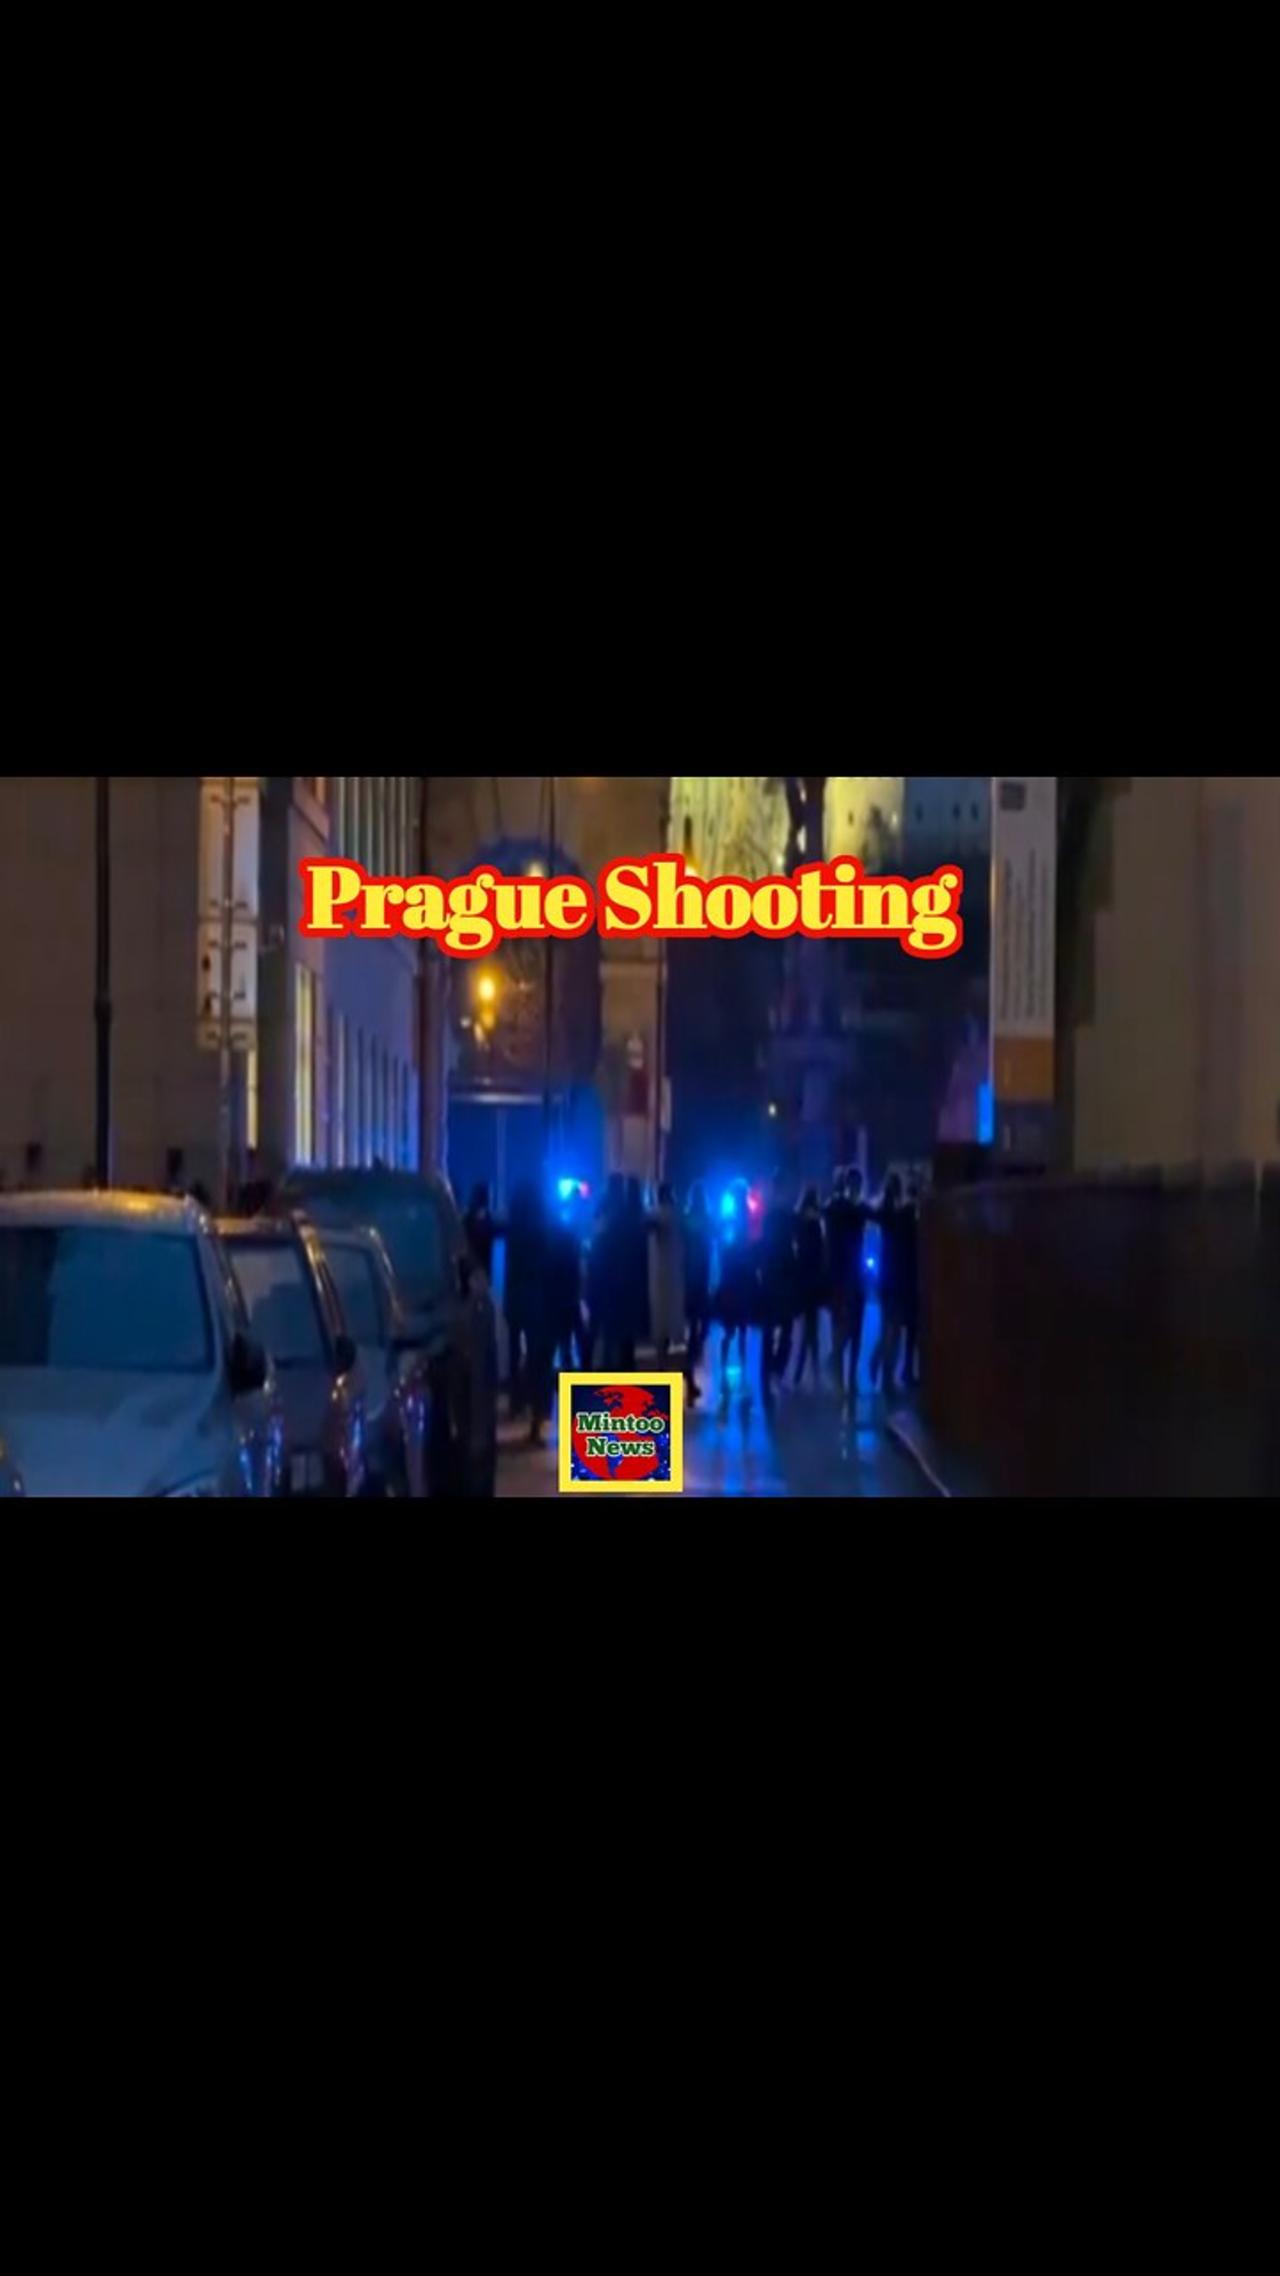 Prague shooting: Czech Republic declares national day of mourning